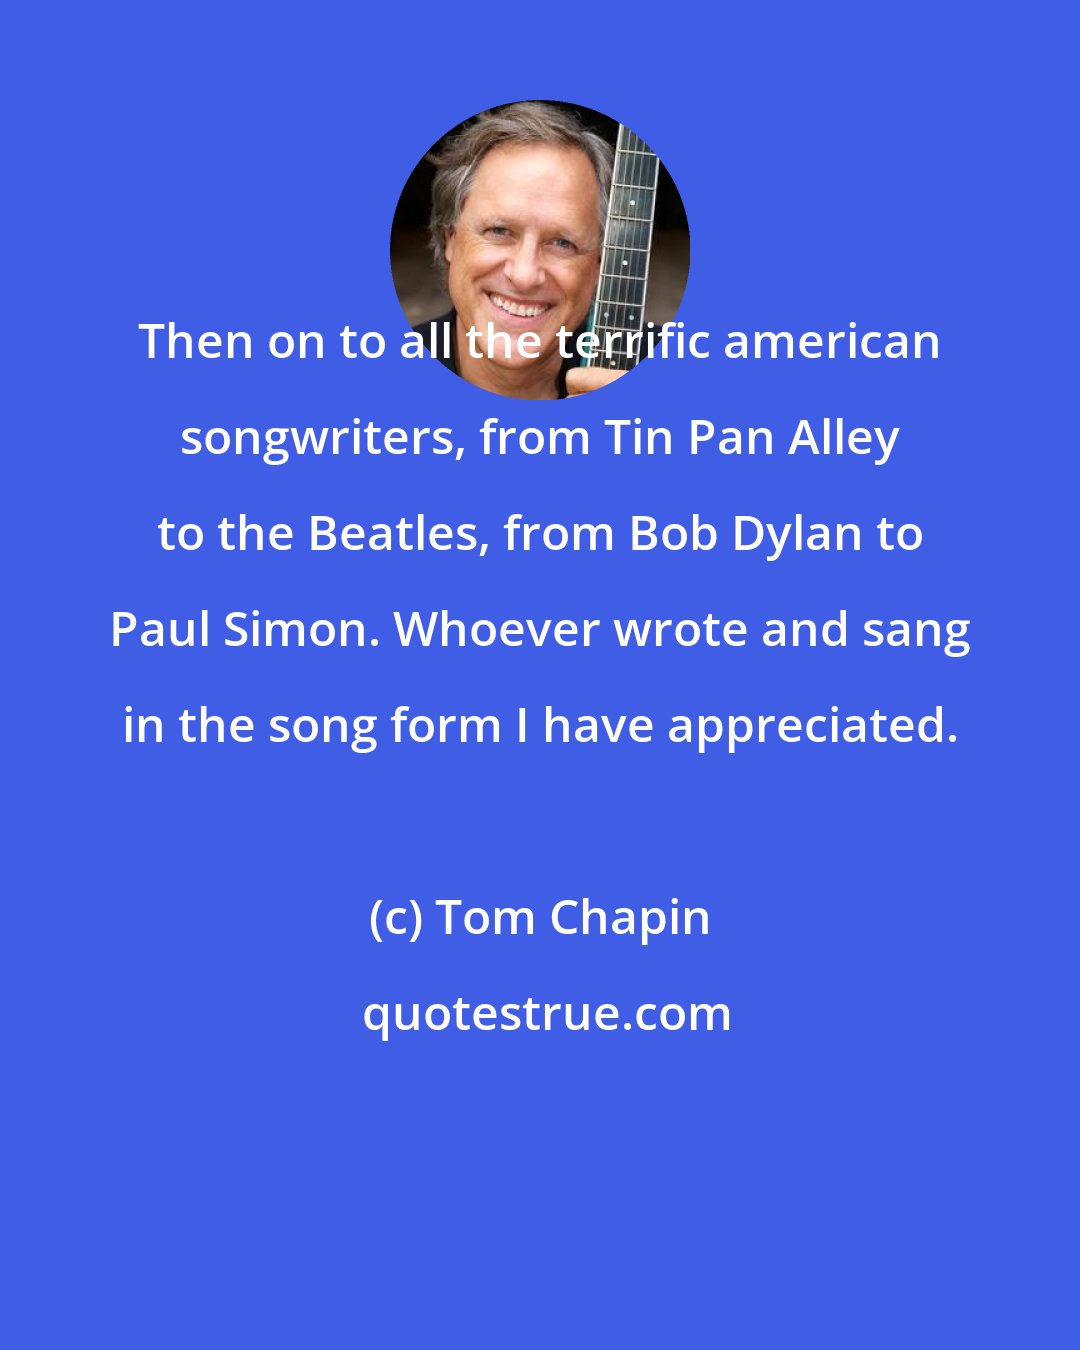 Tom Chapin: Then on to all the terrific american songwriters, from Tin Pan Alley to the Beatles, from Bob Dylan to Paul Simon. Whoever wrote and sang in the song form I have appreciated.